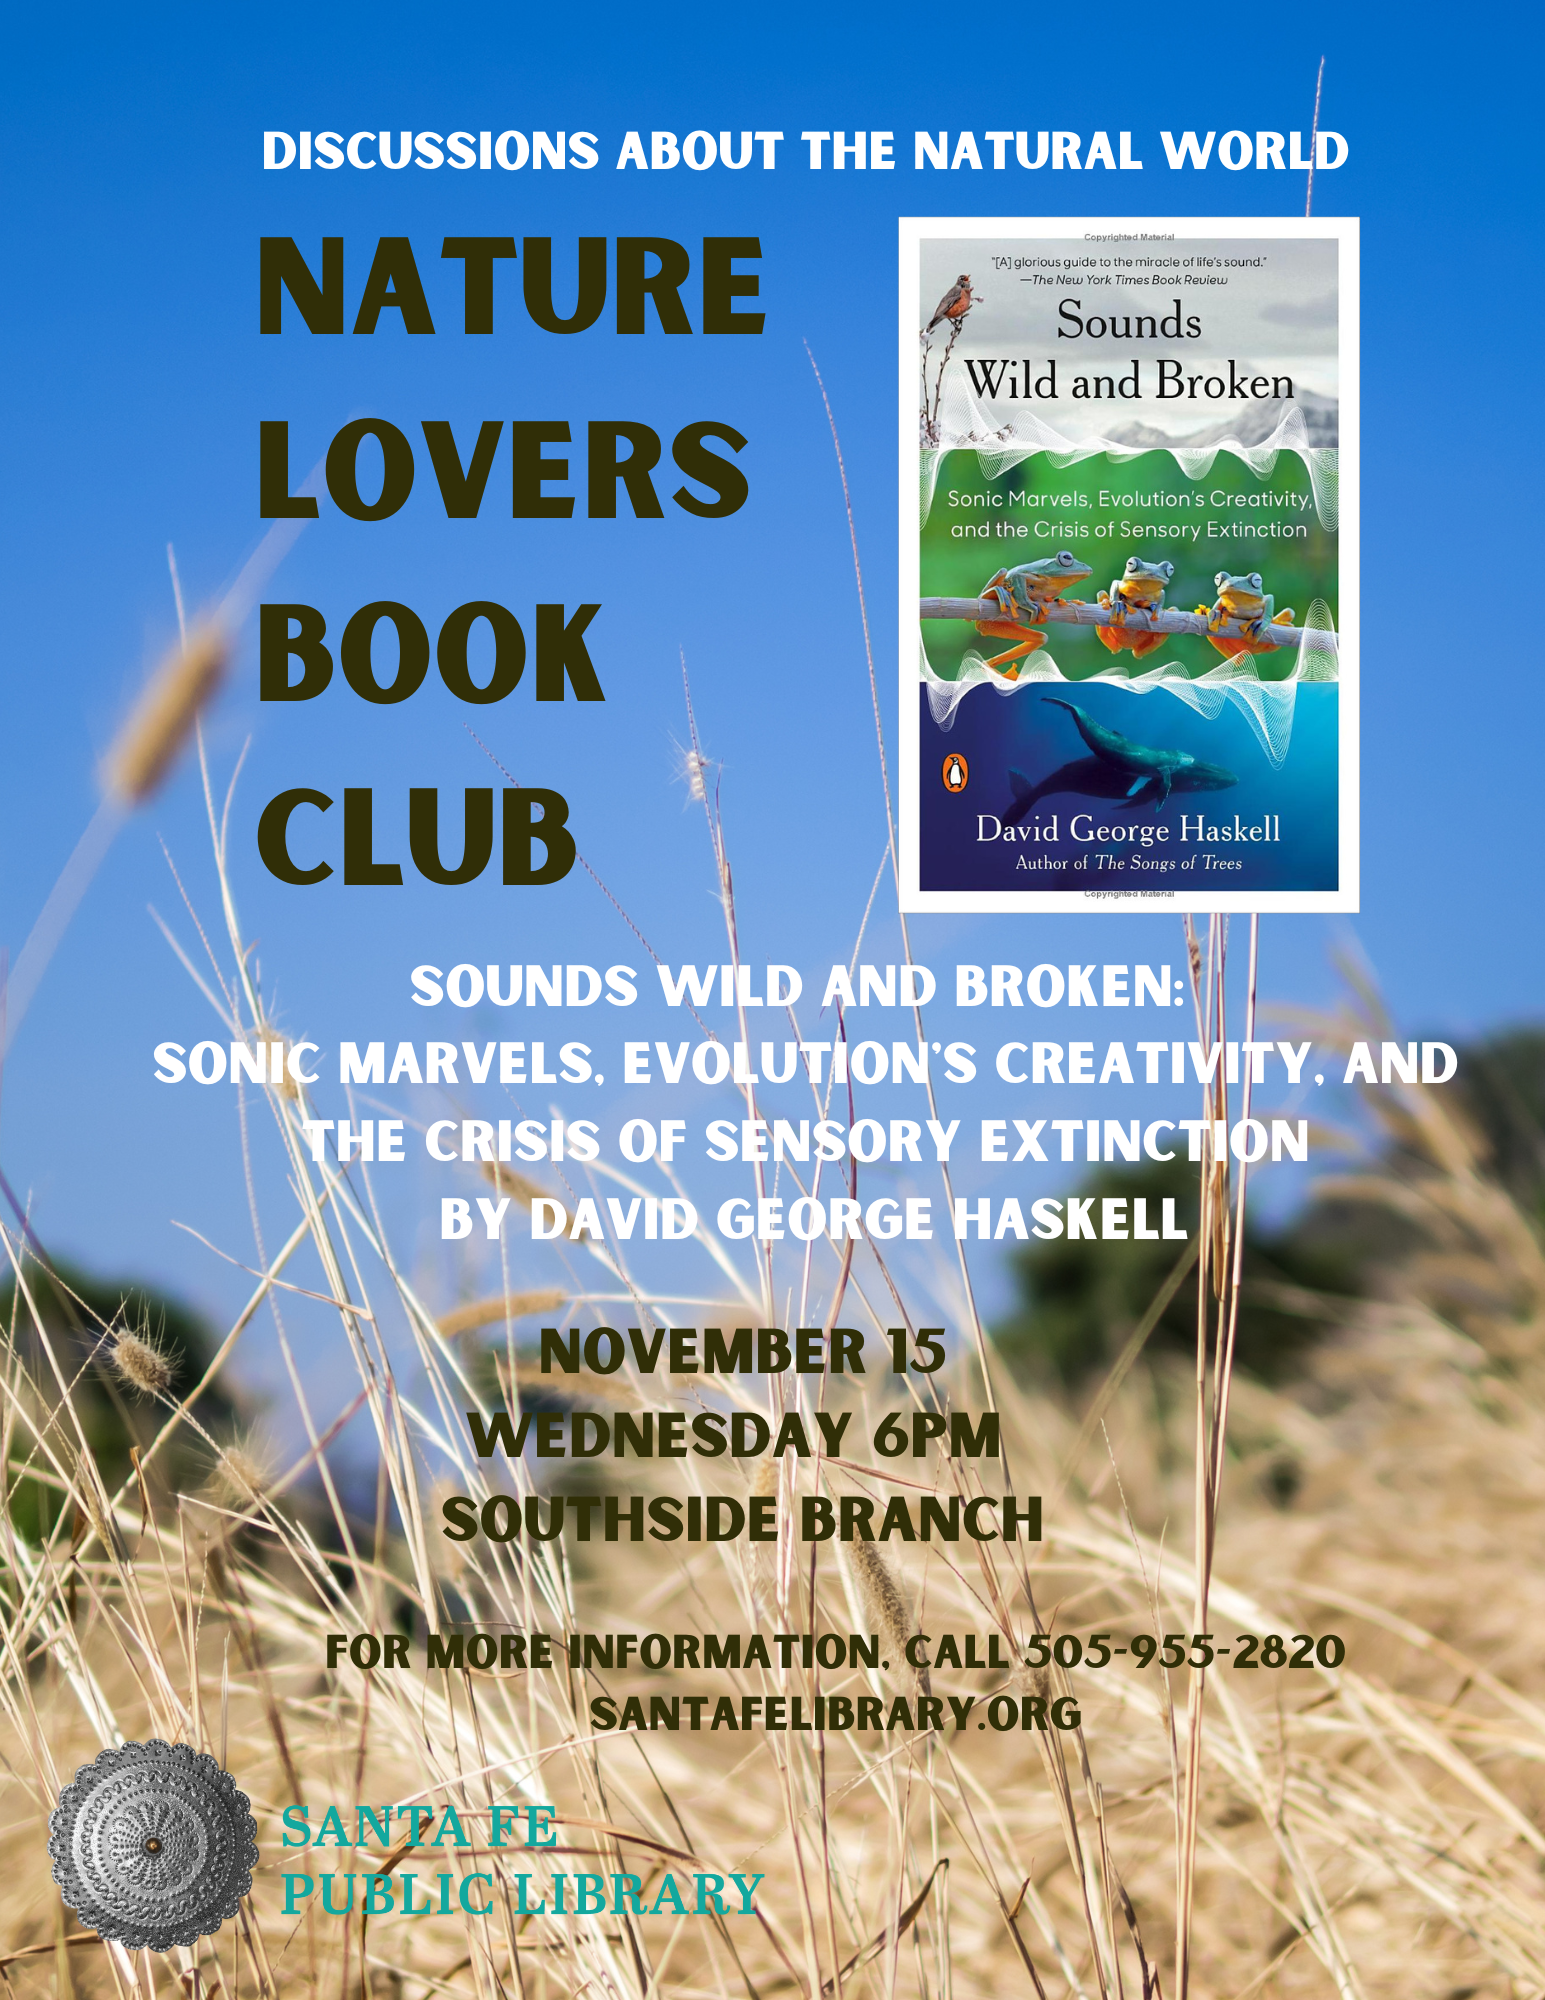 Nature Lovers Book Club discusses Sounds Wild and Broken by David George Haskell